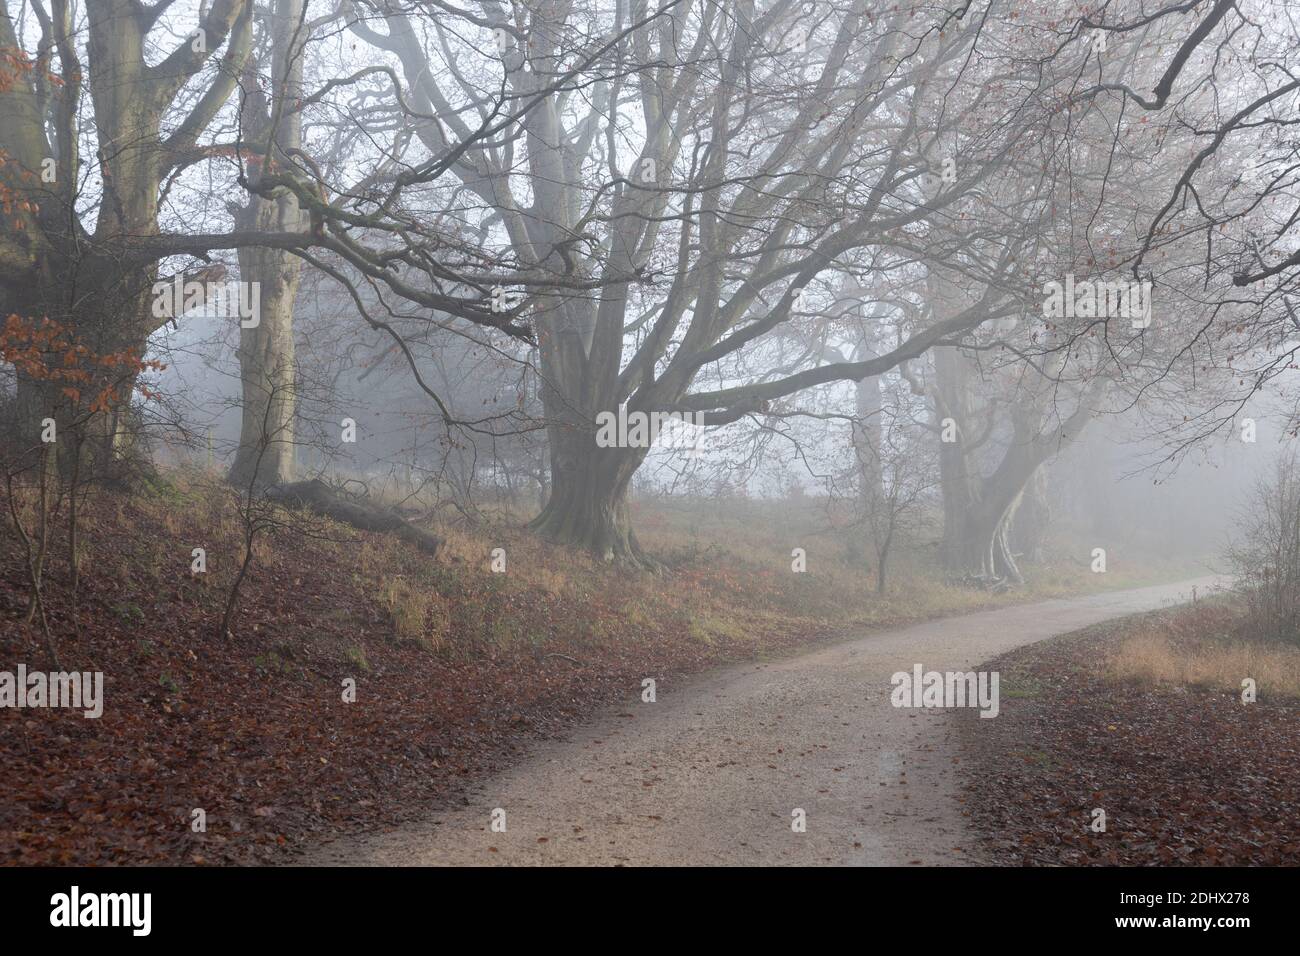 S-bend curved road through mist in forest with ghostly trees in distance feeling lost. High quality photo Stock Photo